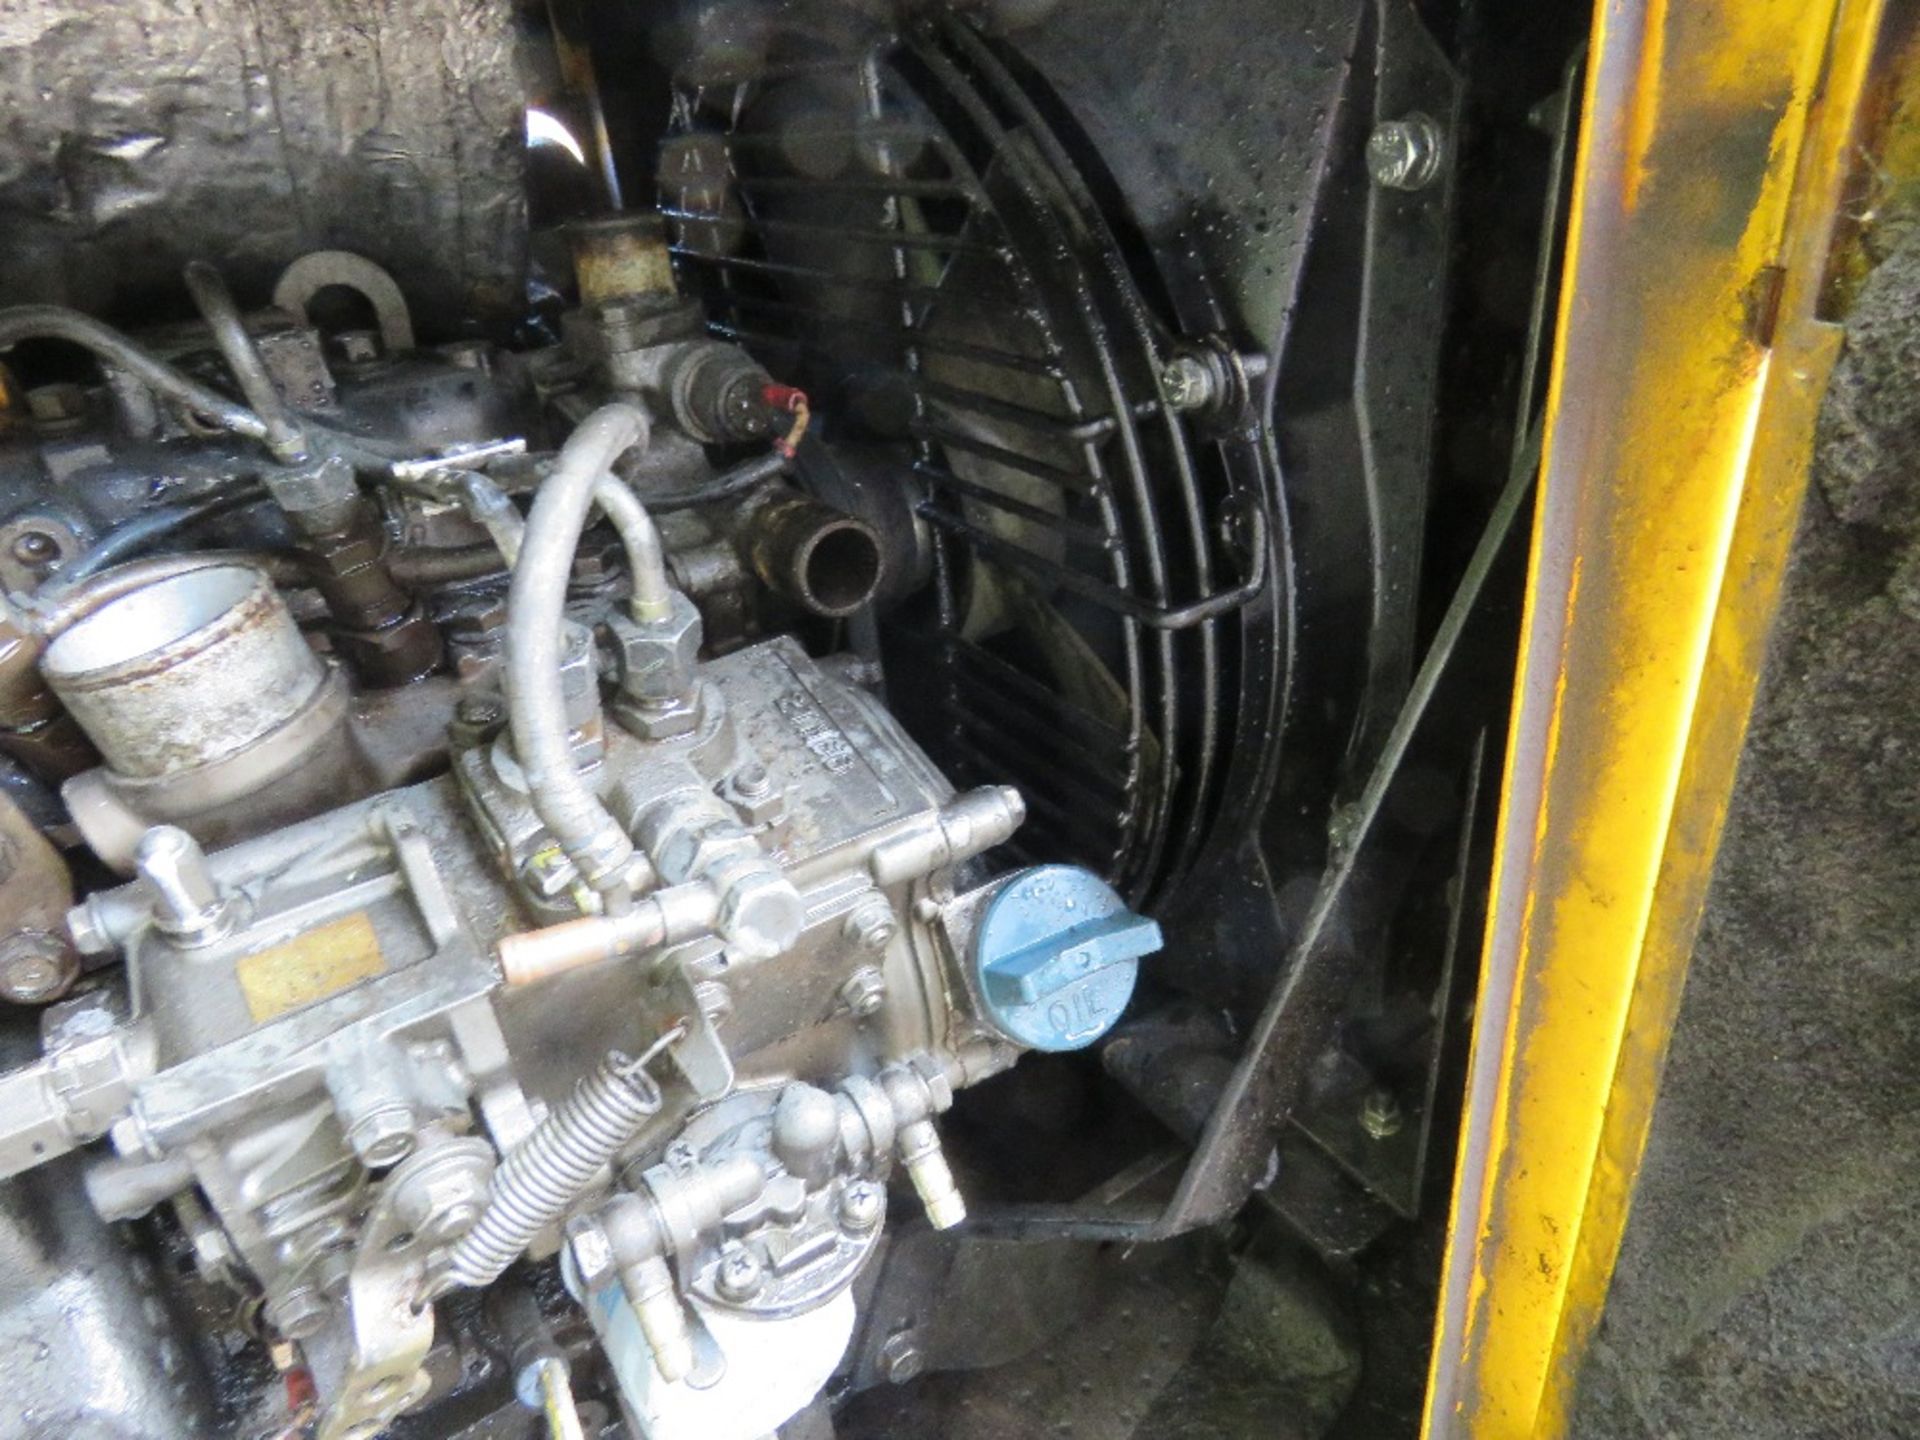 STEPHILL 9KVA SKID GENERATOR WITH YANMAR 2 CYLINDER ENGIE. FROM VISUAL INSPECTION HOSES MISSING FROM - Image 5 of 5